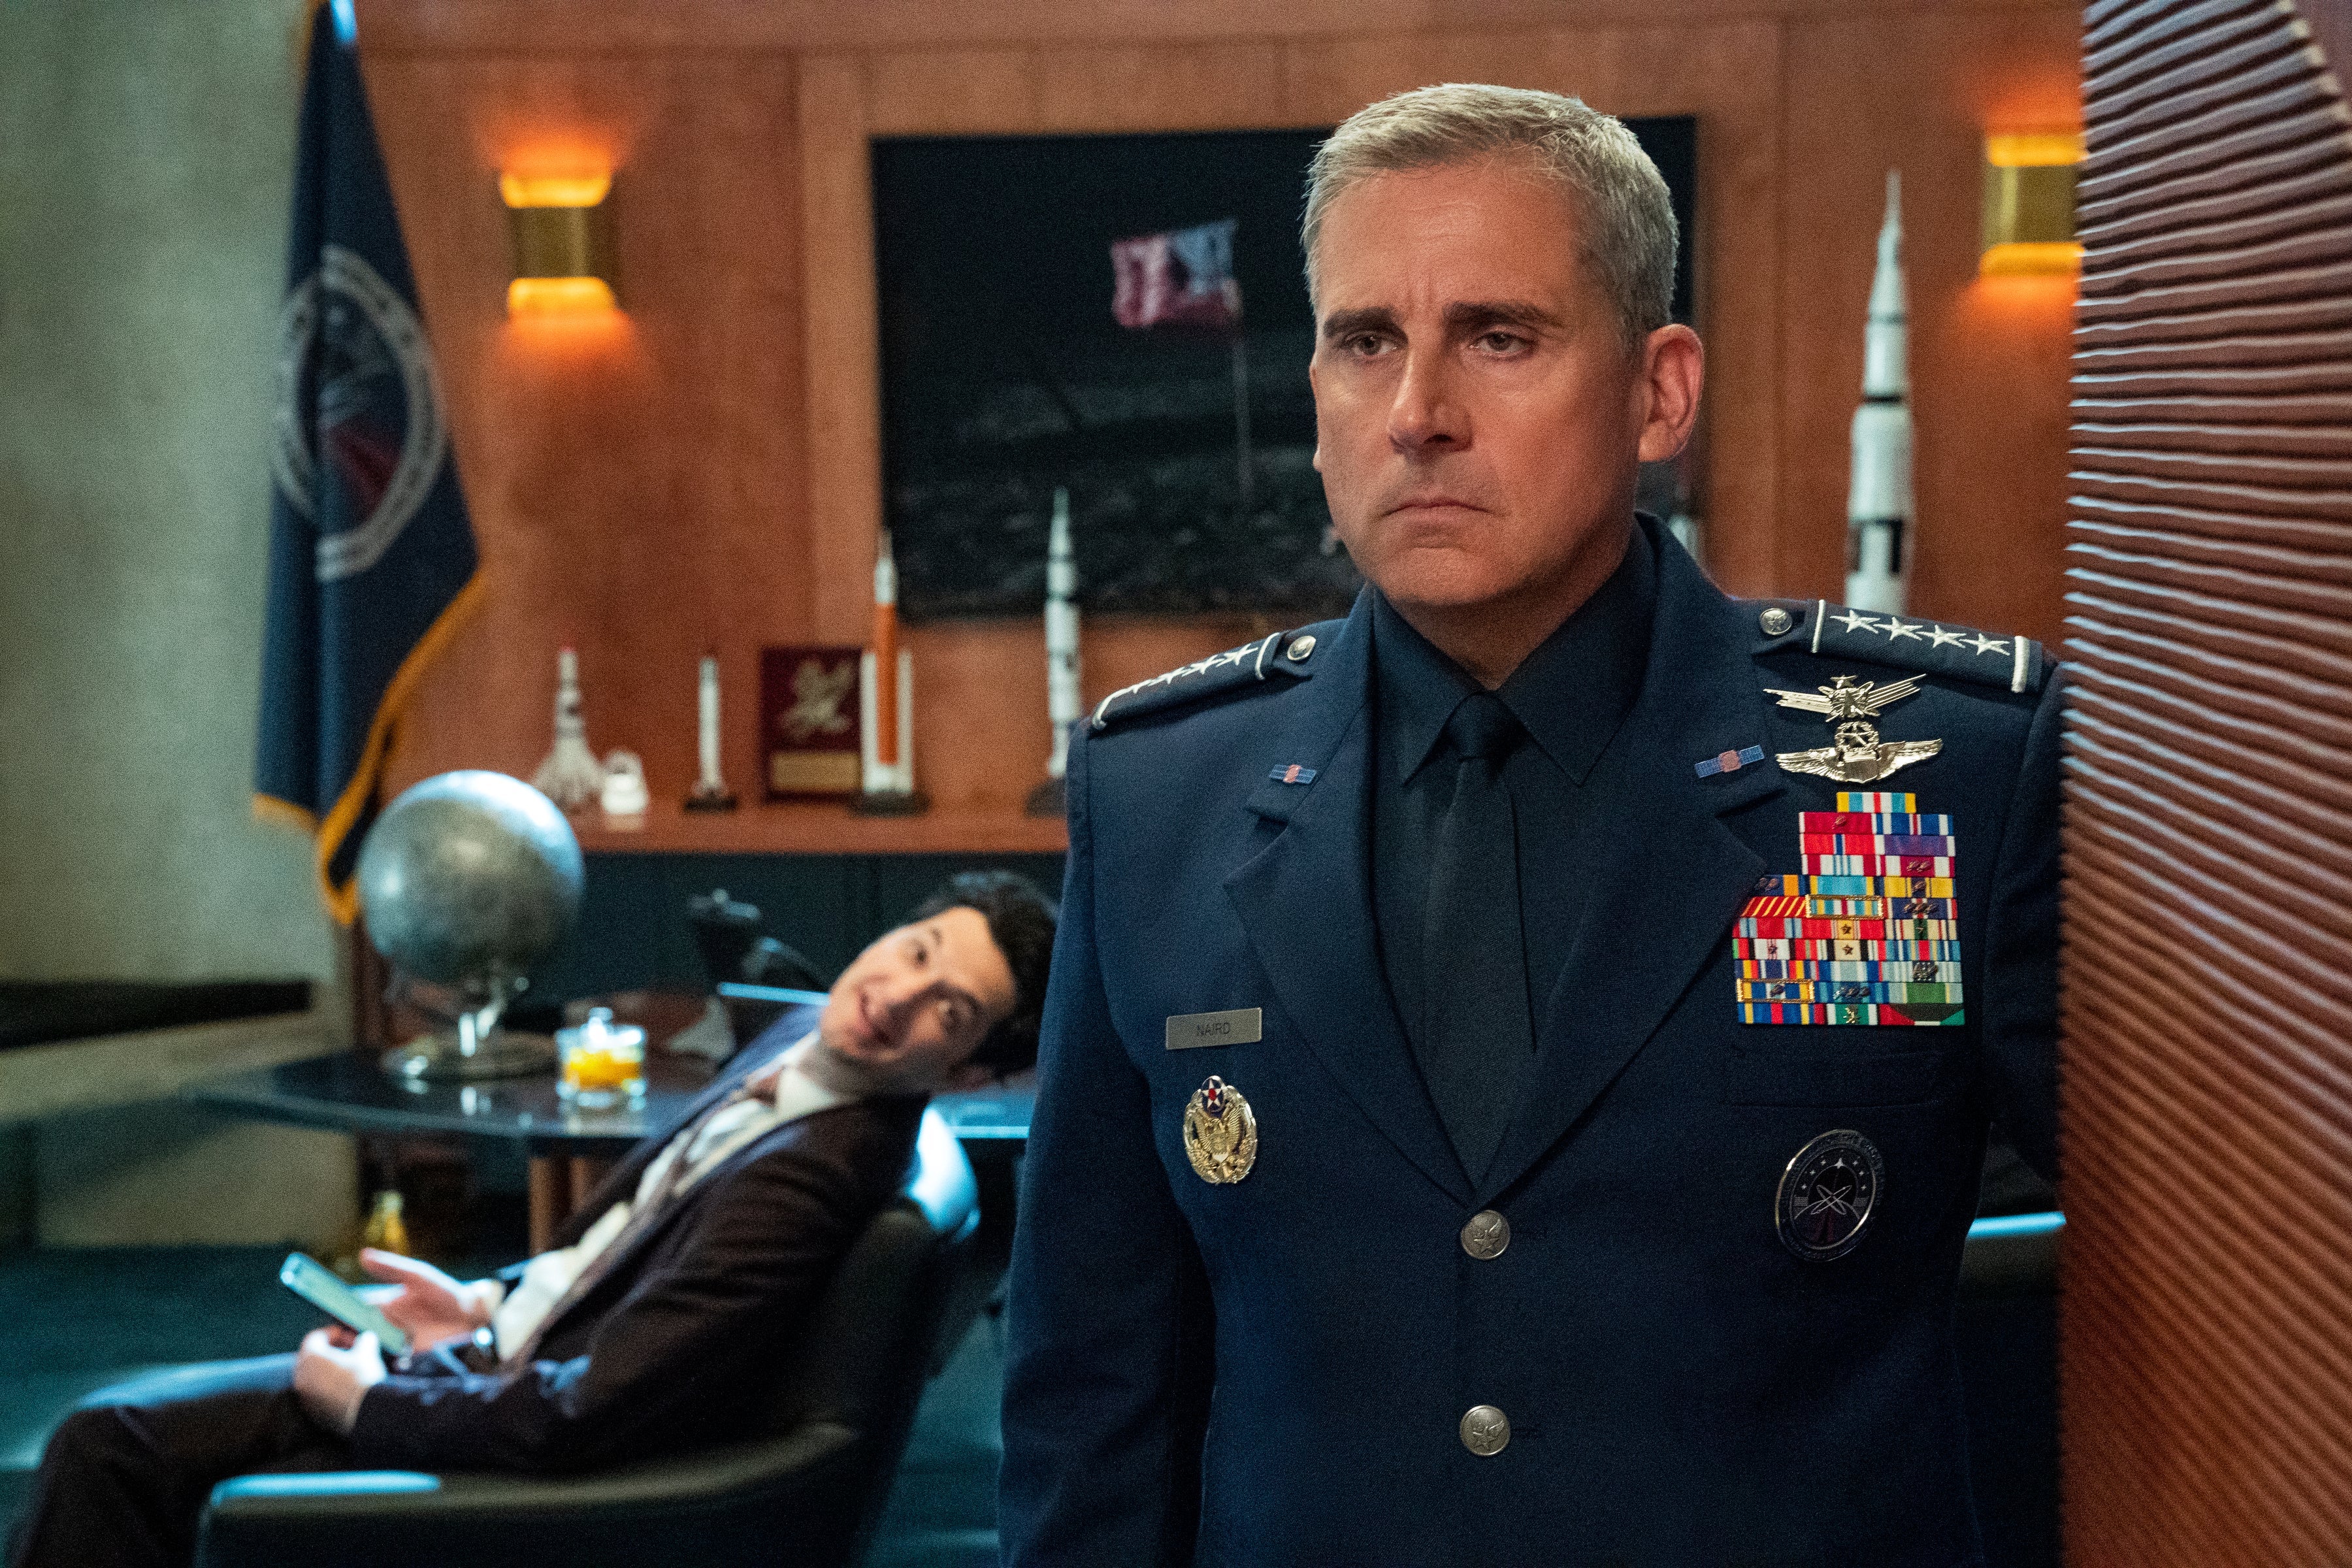 Steve Carell, in military uniform, stares glumly into the distance.